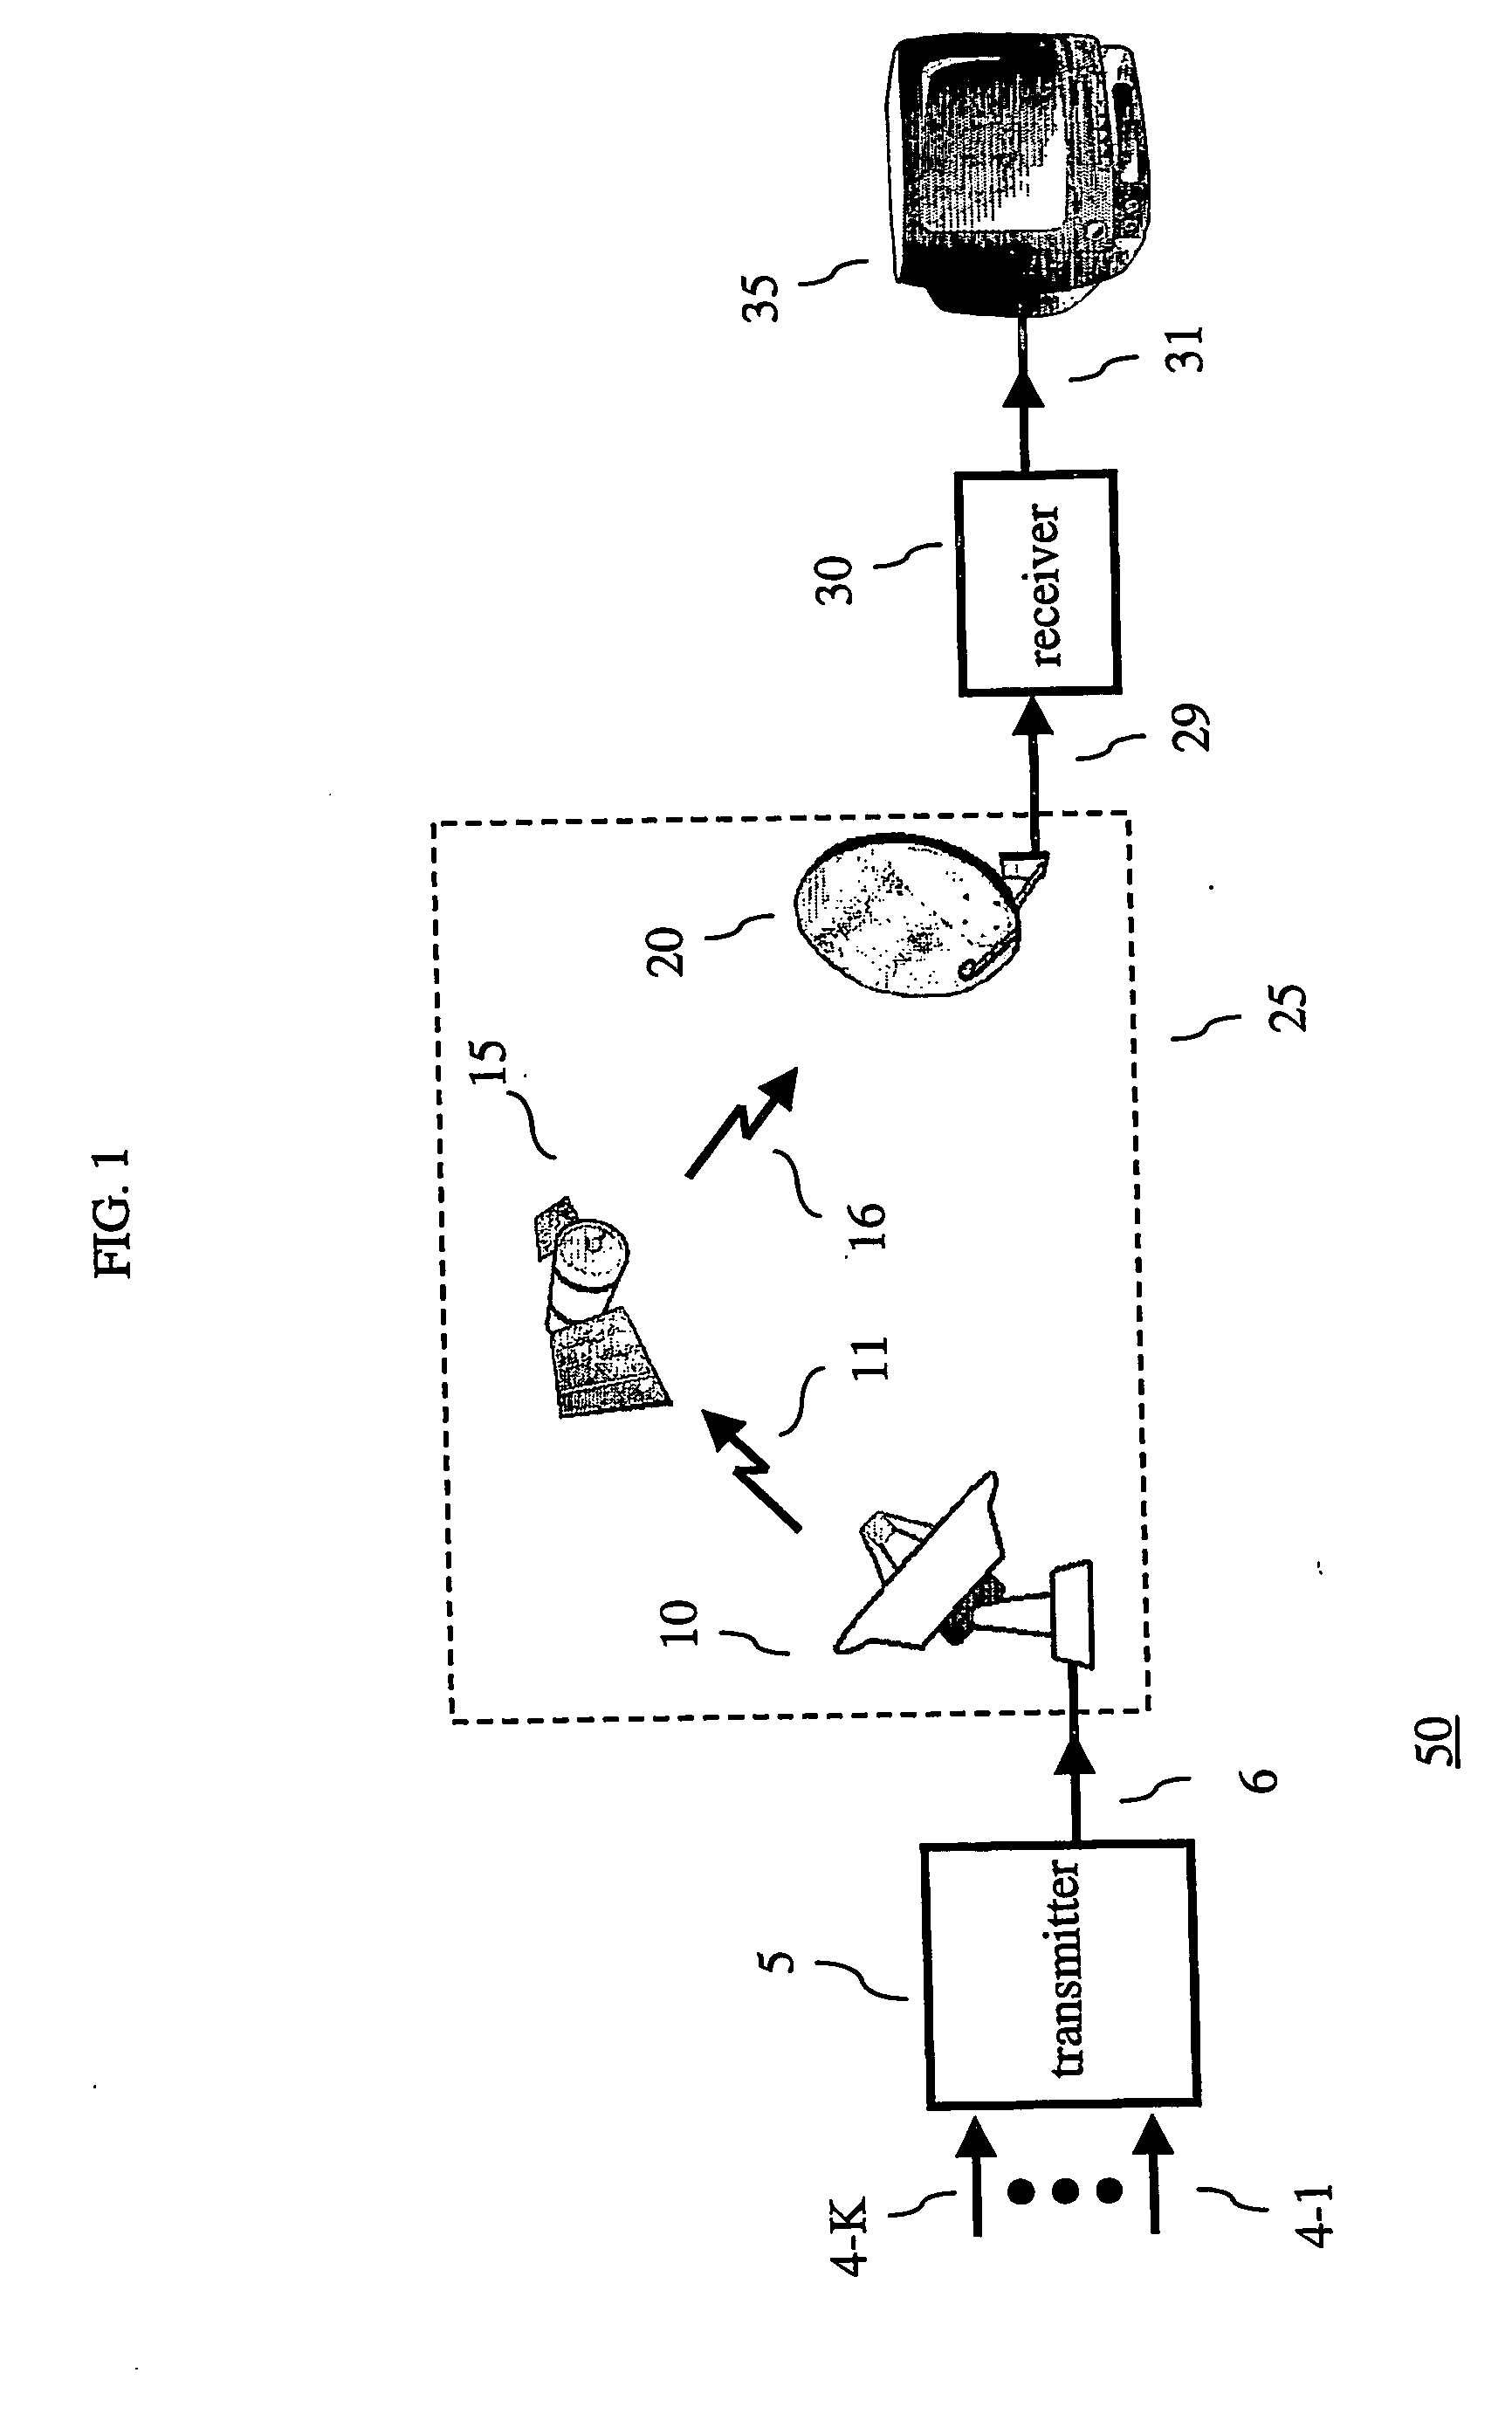 Apparatus and method for decoding in a hierarchical, modulation system